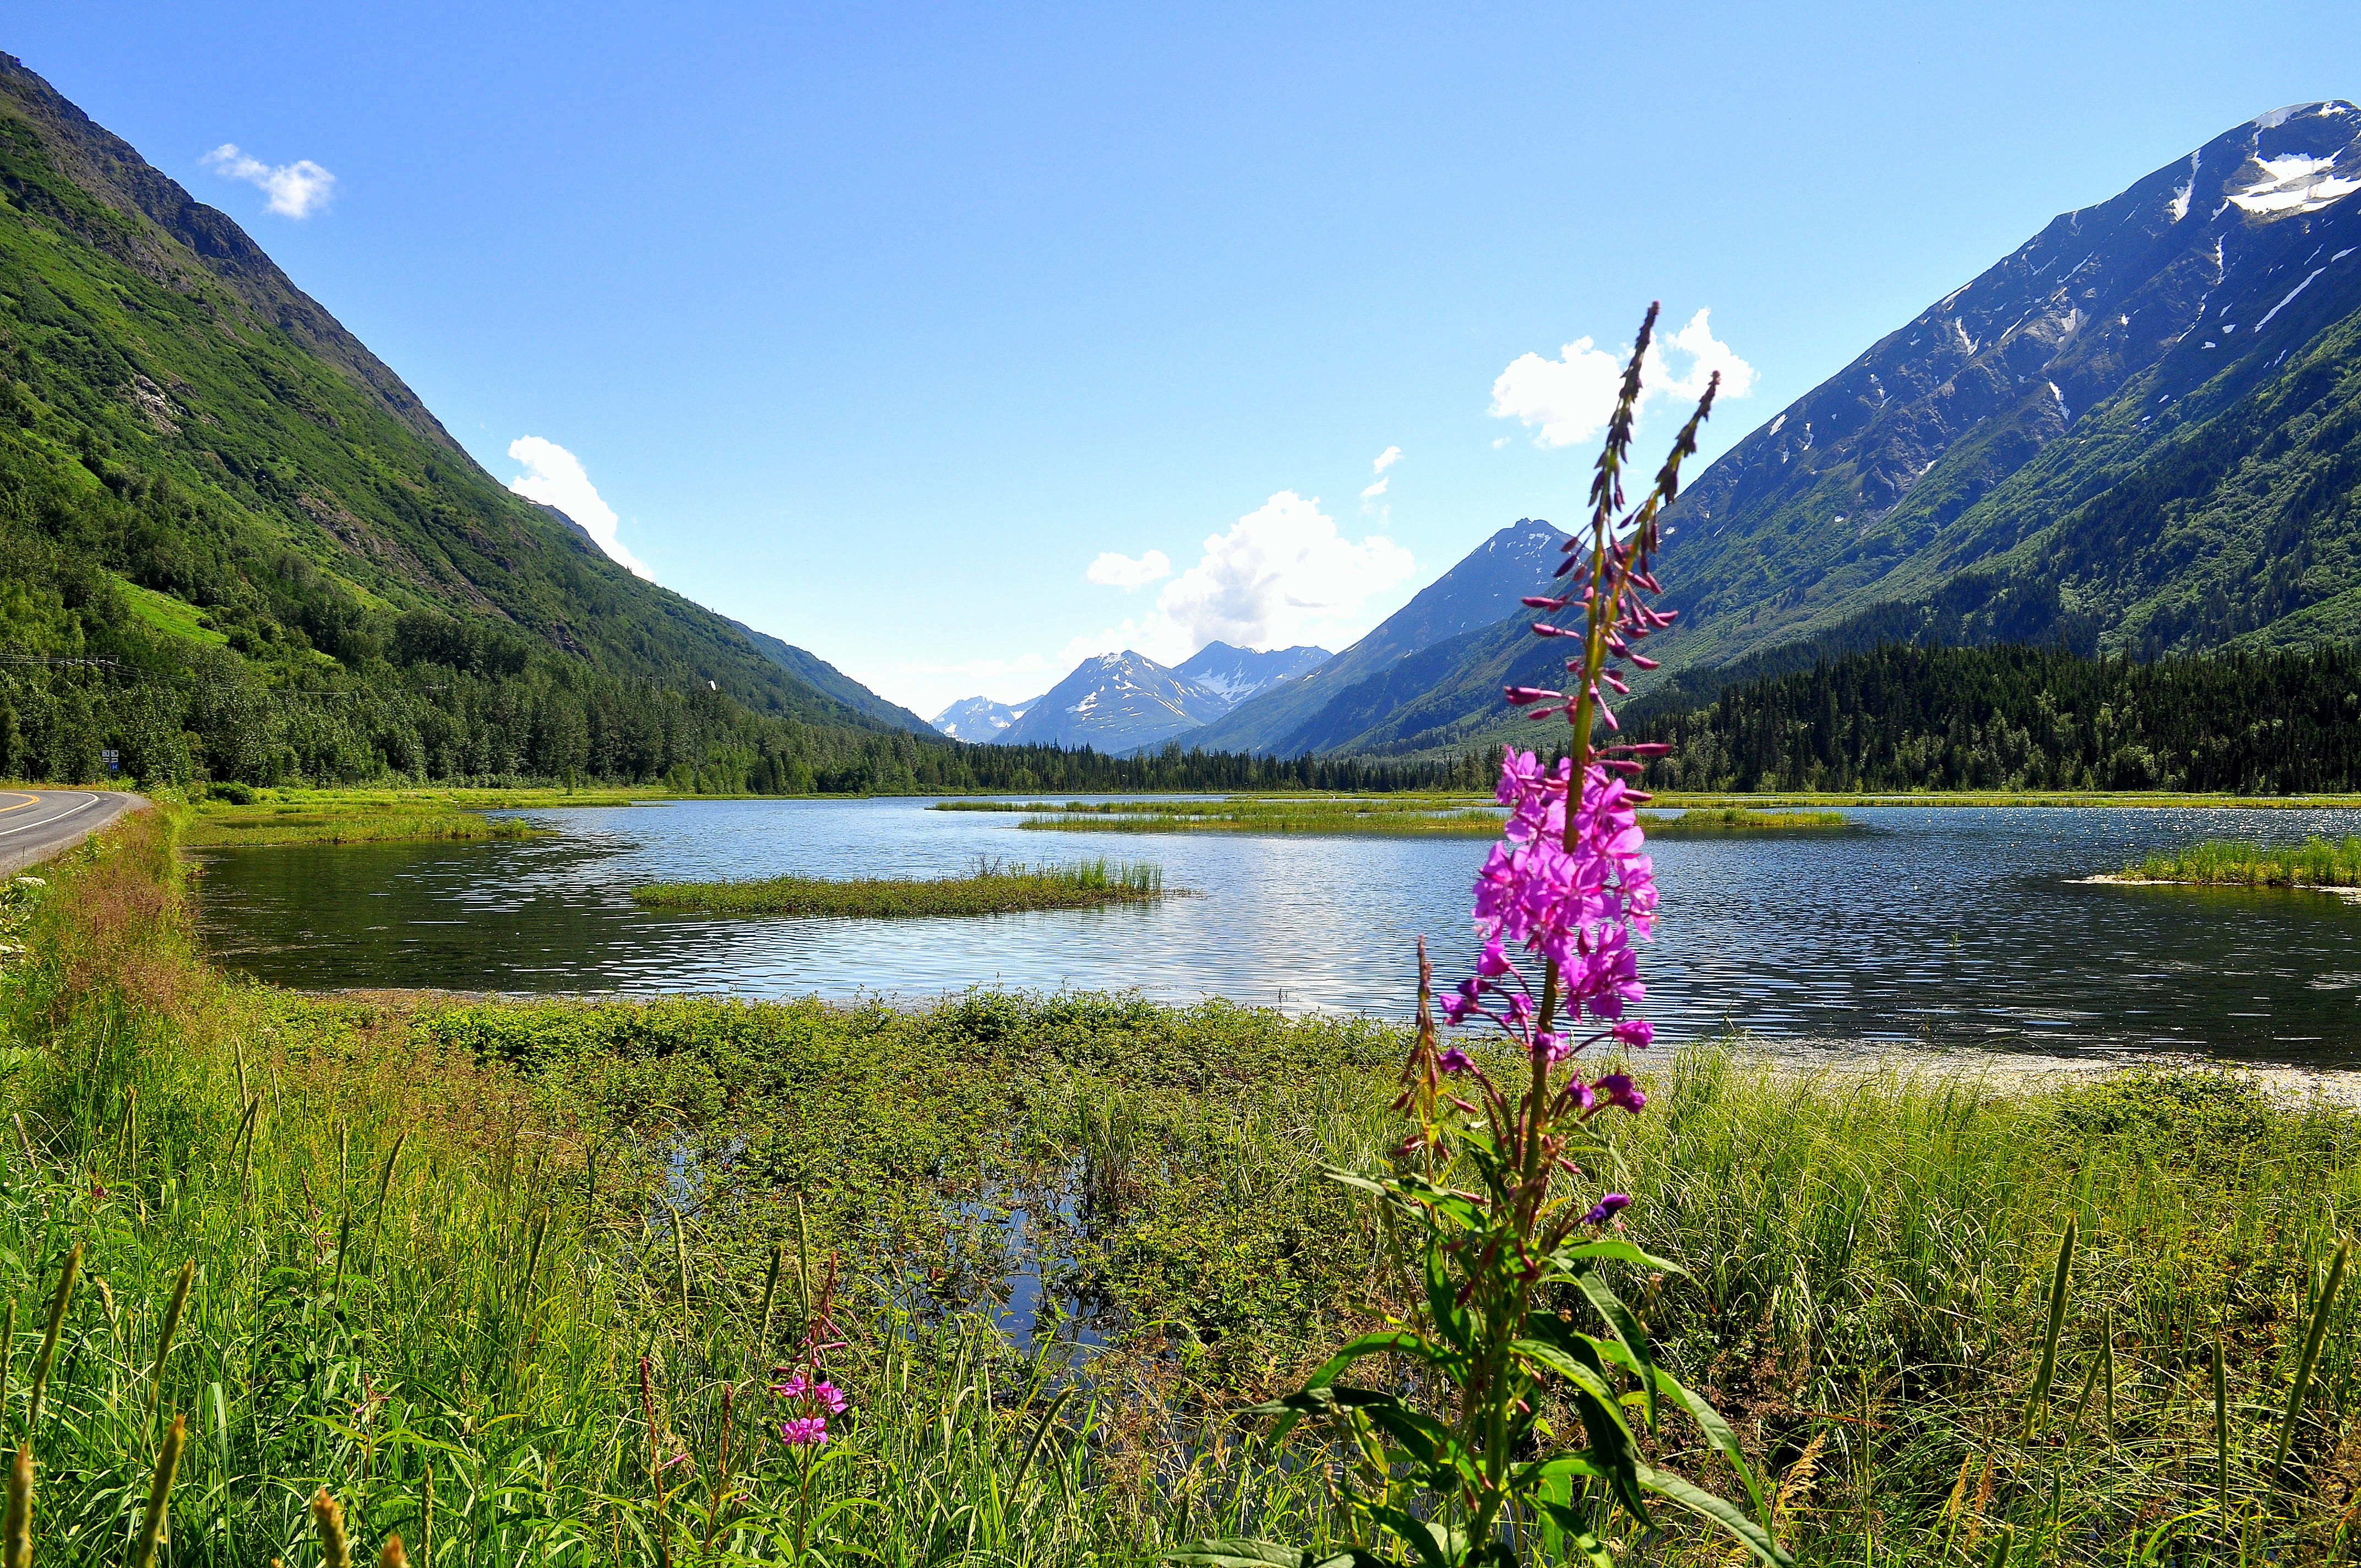 A sprig of fireweed next to a lake with mountains in the background